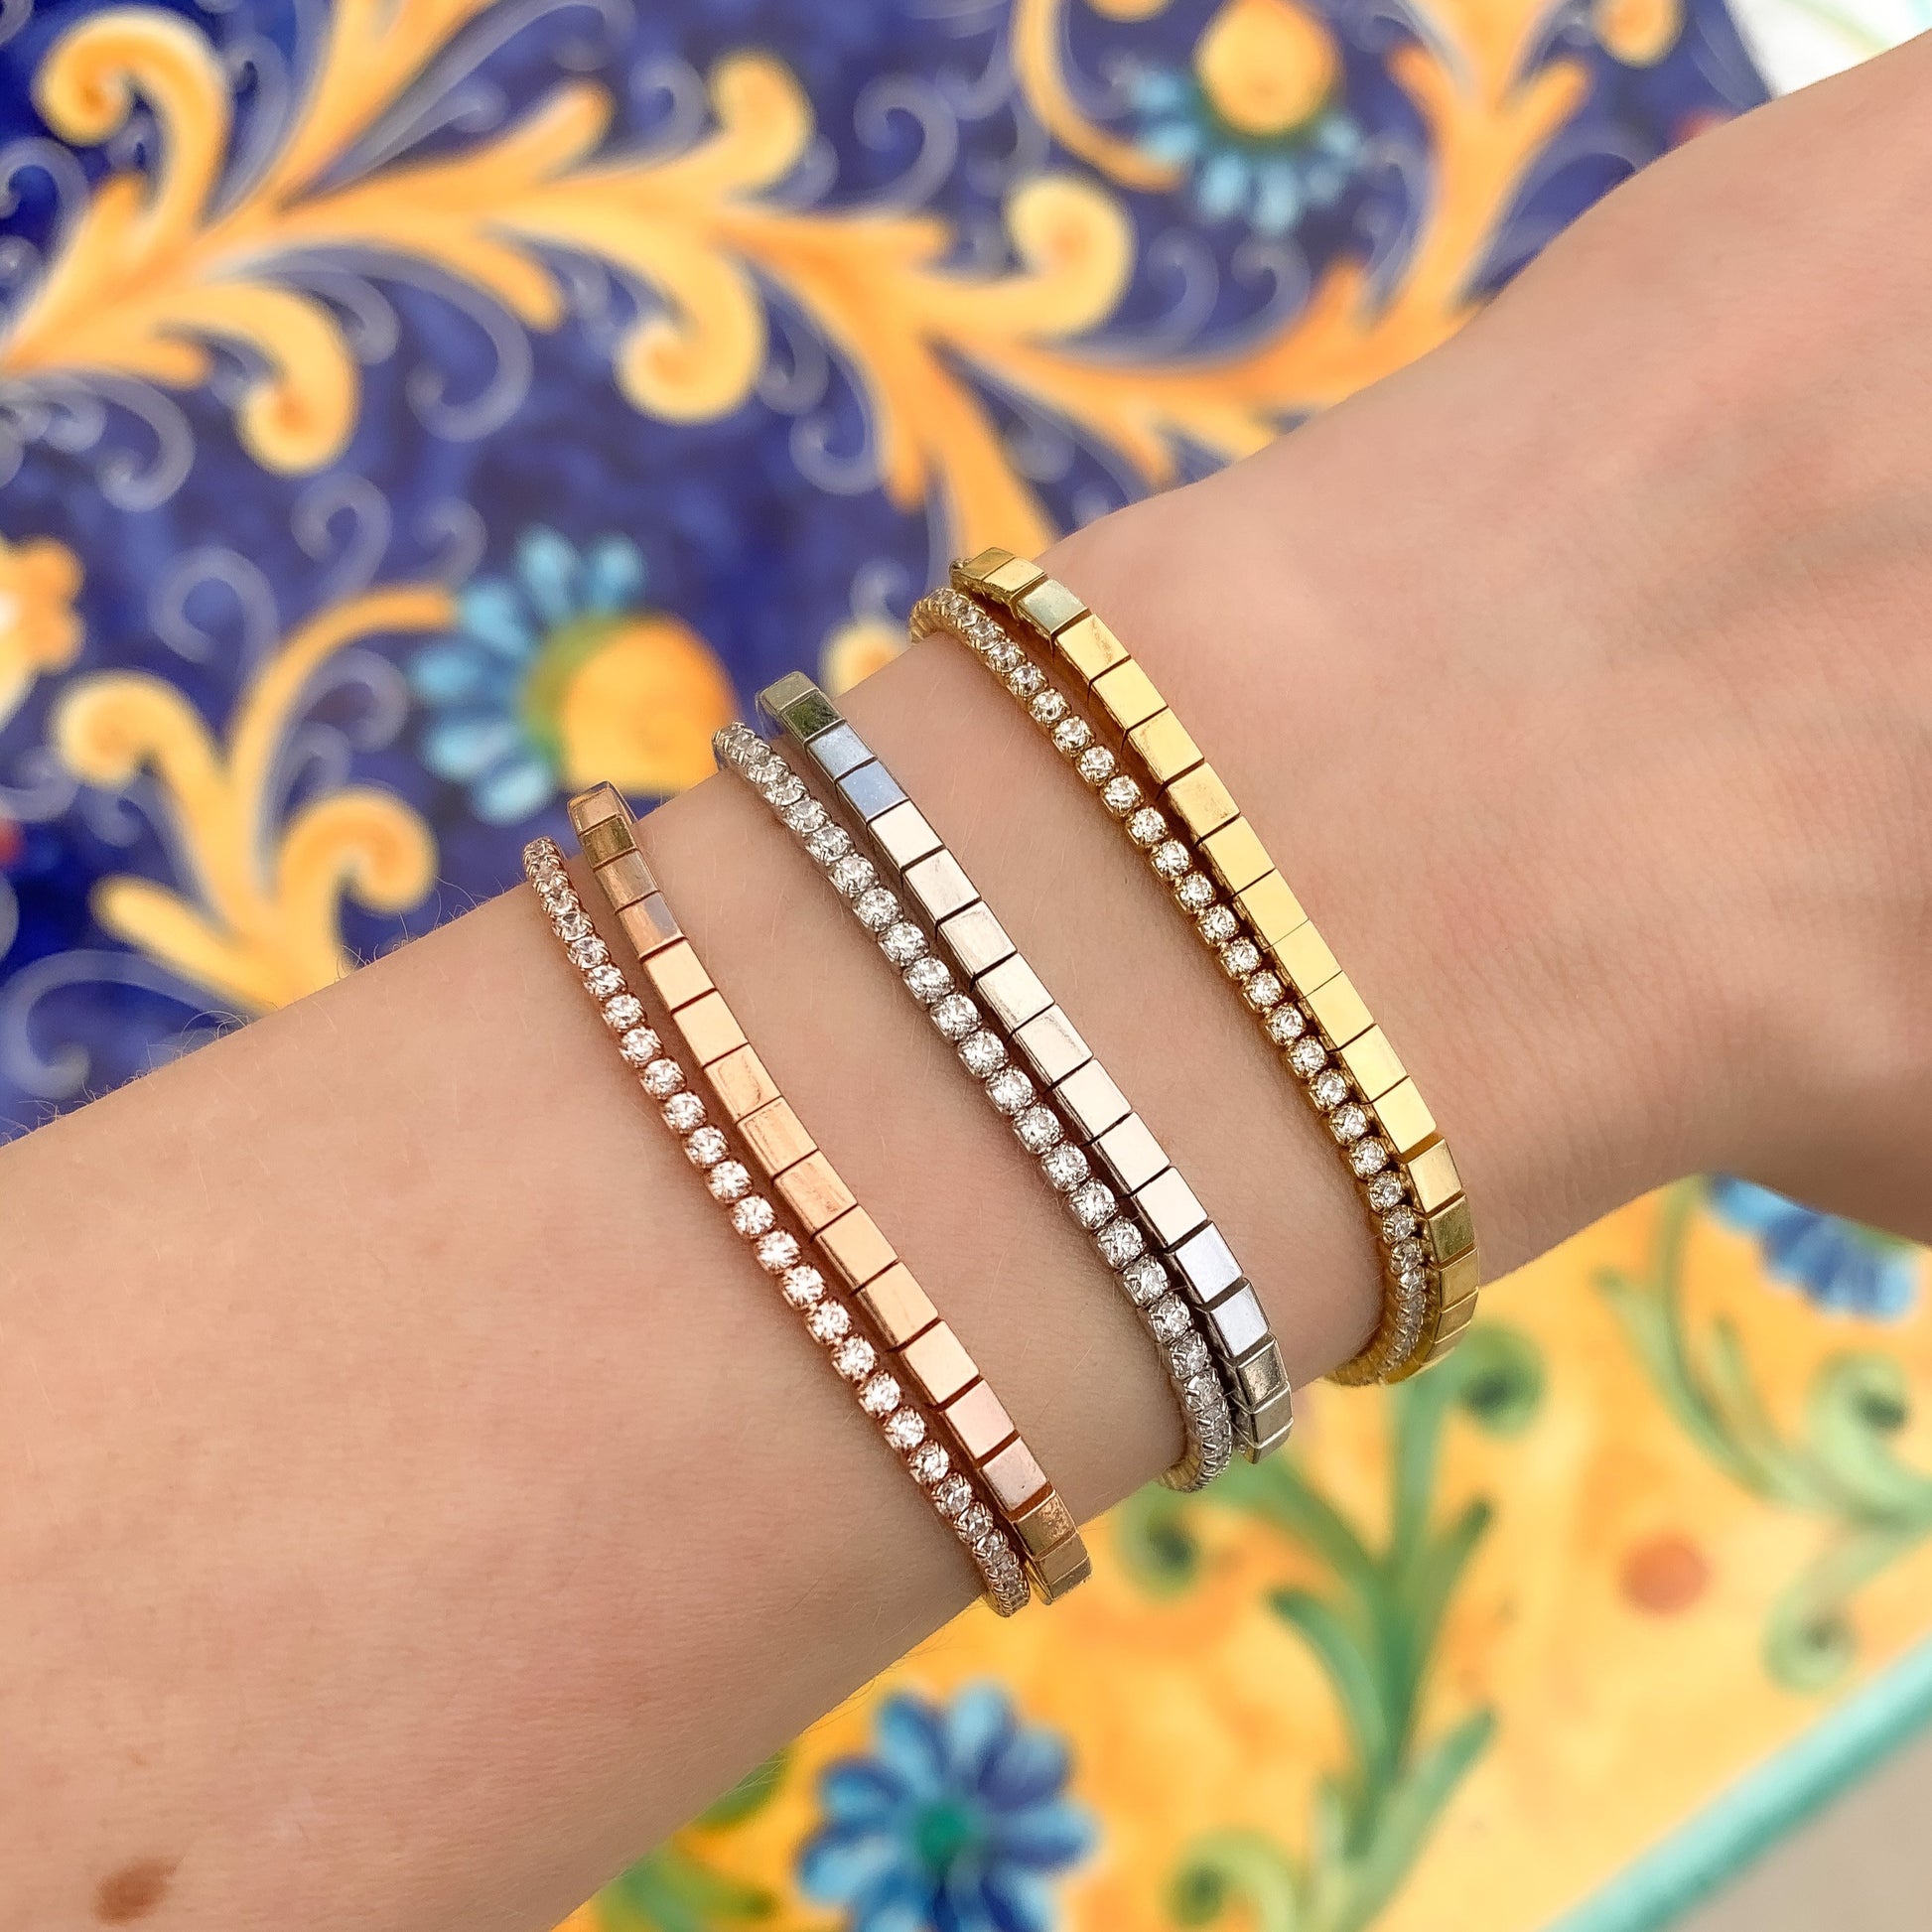 Creating a modern bracelet stack with our thin cz tennis bracelets at Alexandra Marks Jewelry